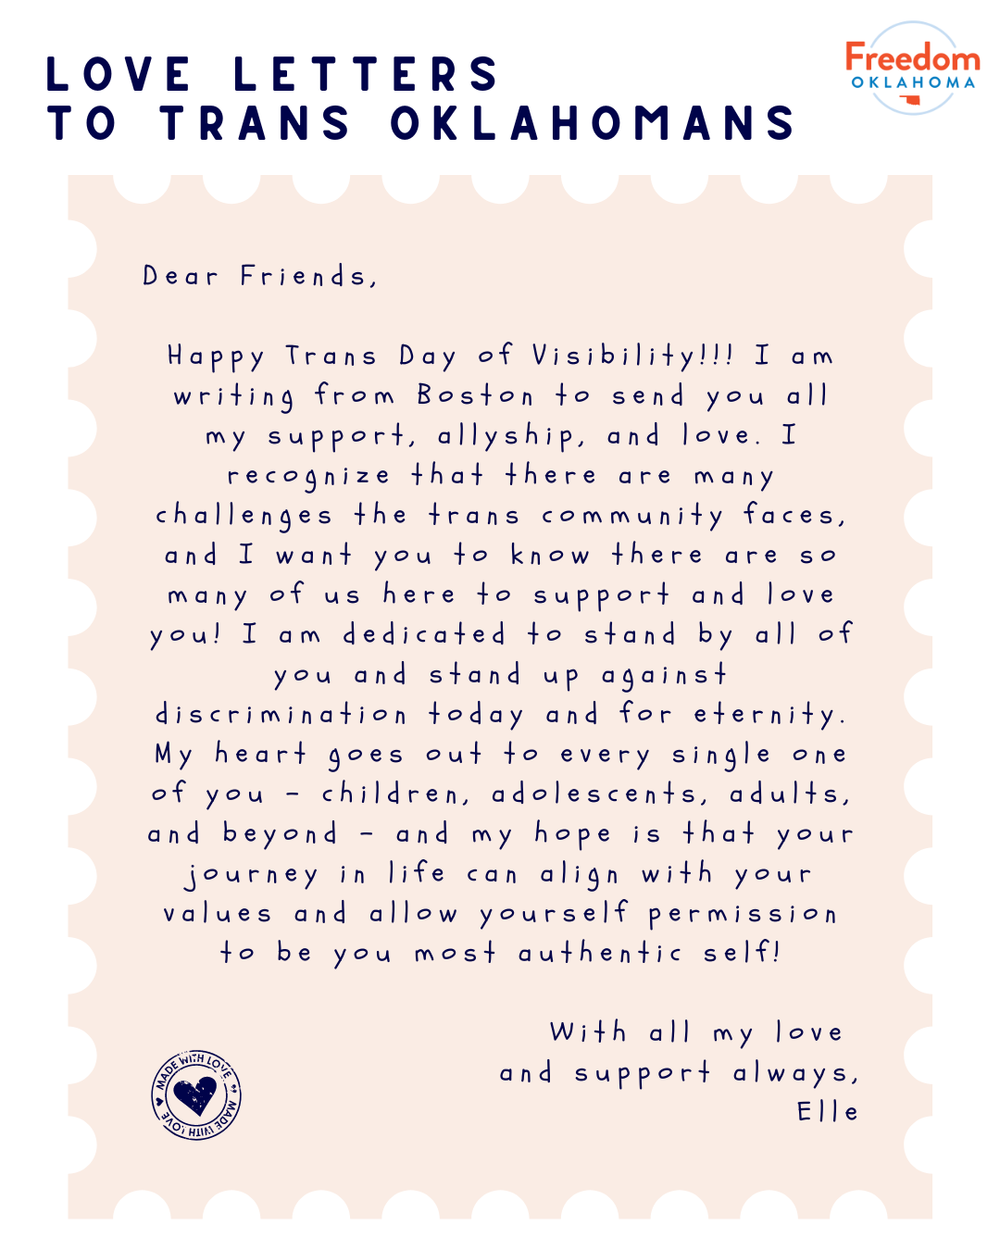  "Love Letters to Trans Oklahomans" on a white background. A graphic of a beige stamp takes up most of the graphic with the text of a love letter: Dear Friends, Happy Trans Day of Visibility!!! I am writing from Boston to send you all my support, all